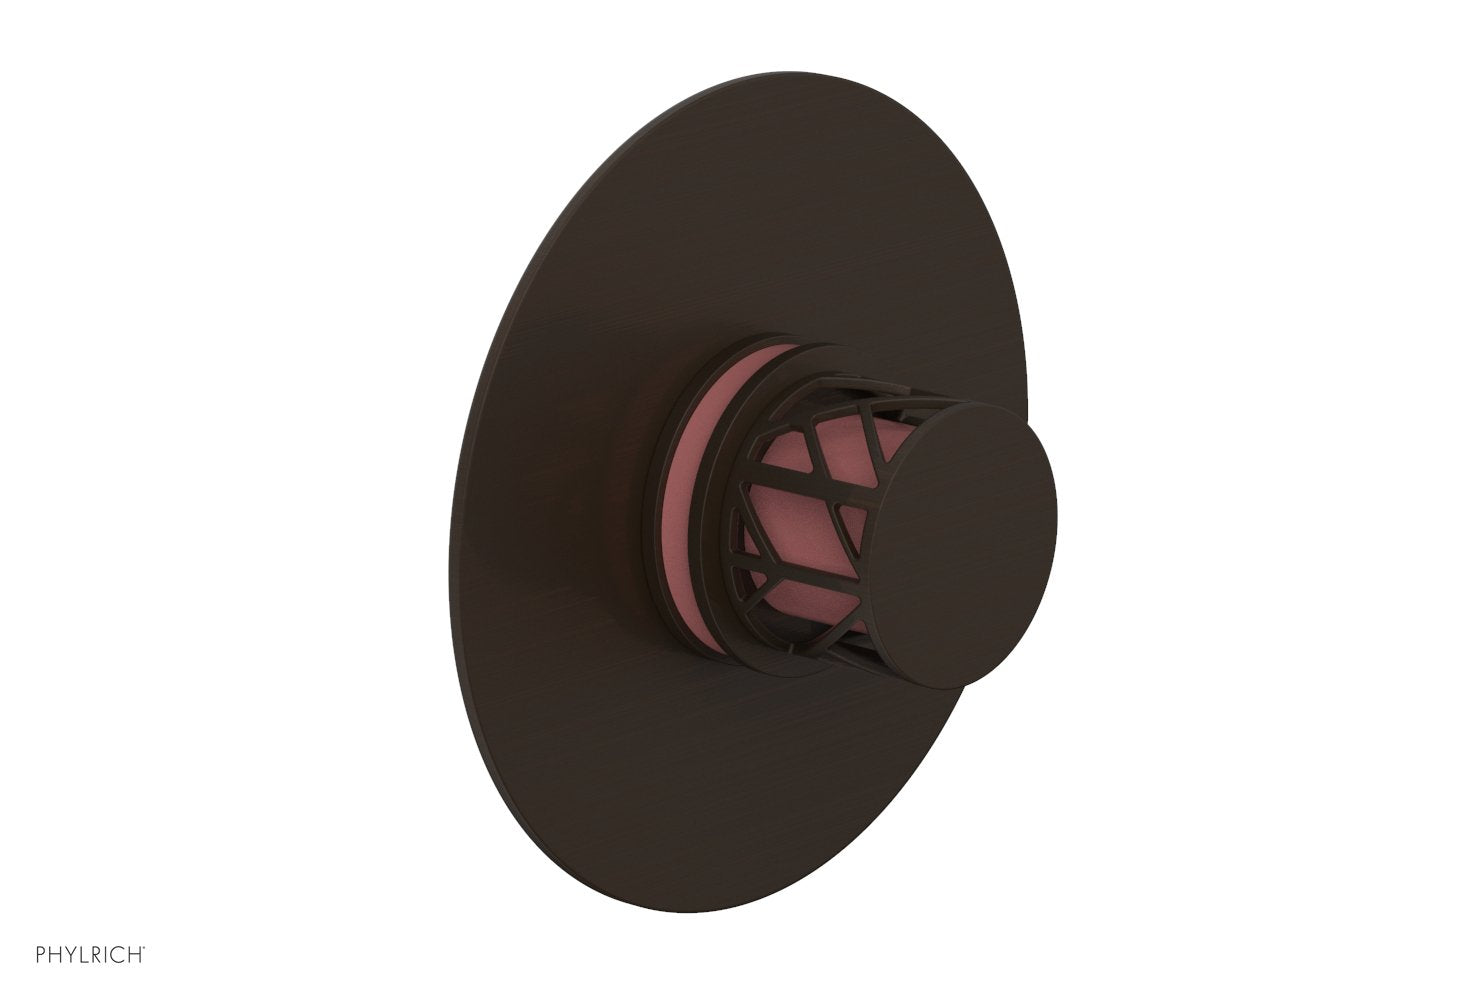 Phylrich JOLIE Pressure Balance Shower Plate & Handle Trim, Round Handle with "Pink" Accents